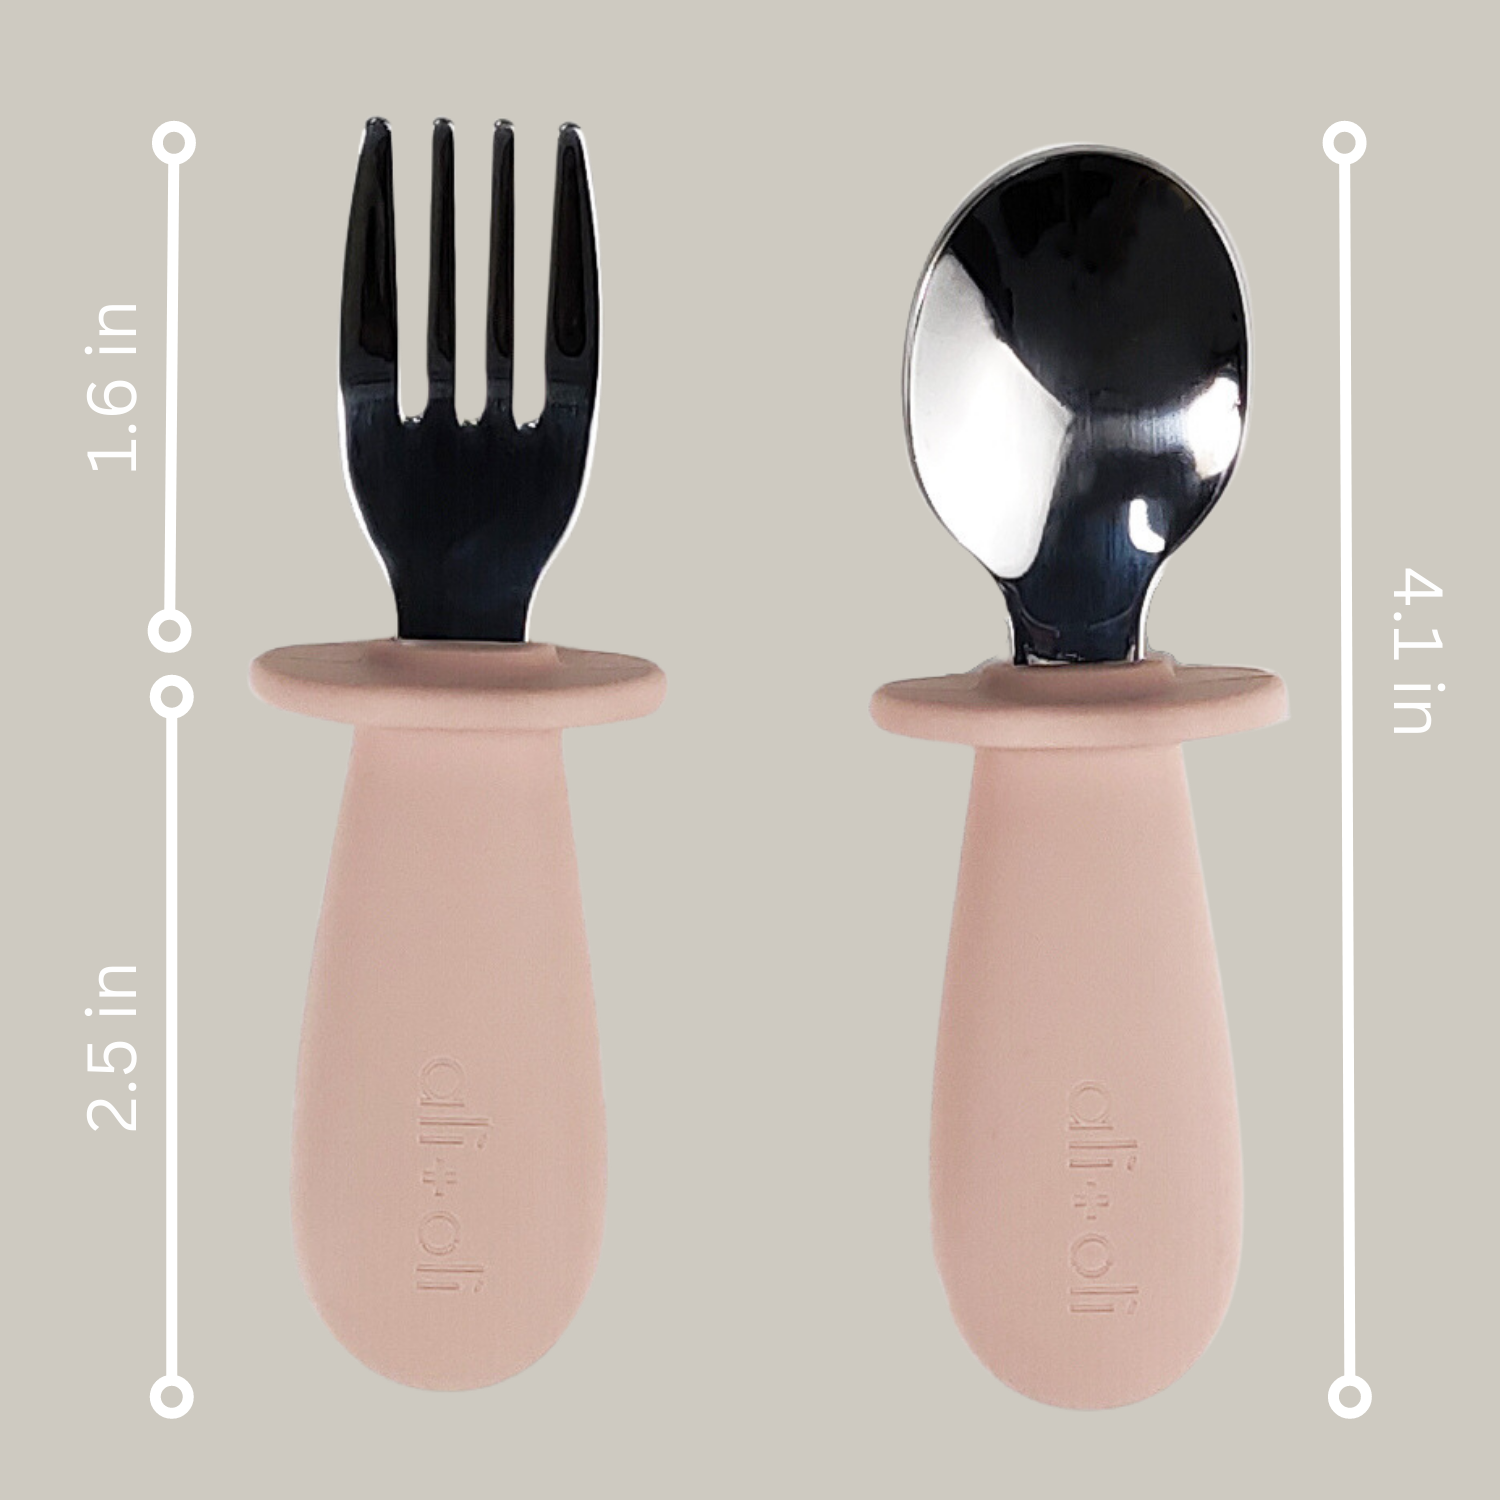 Ali+Oli Spoon & Fork Learning Set for Toddlers (Pink) 6m+